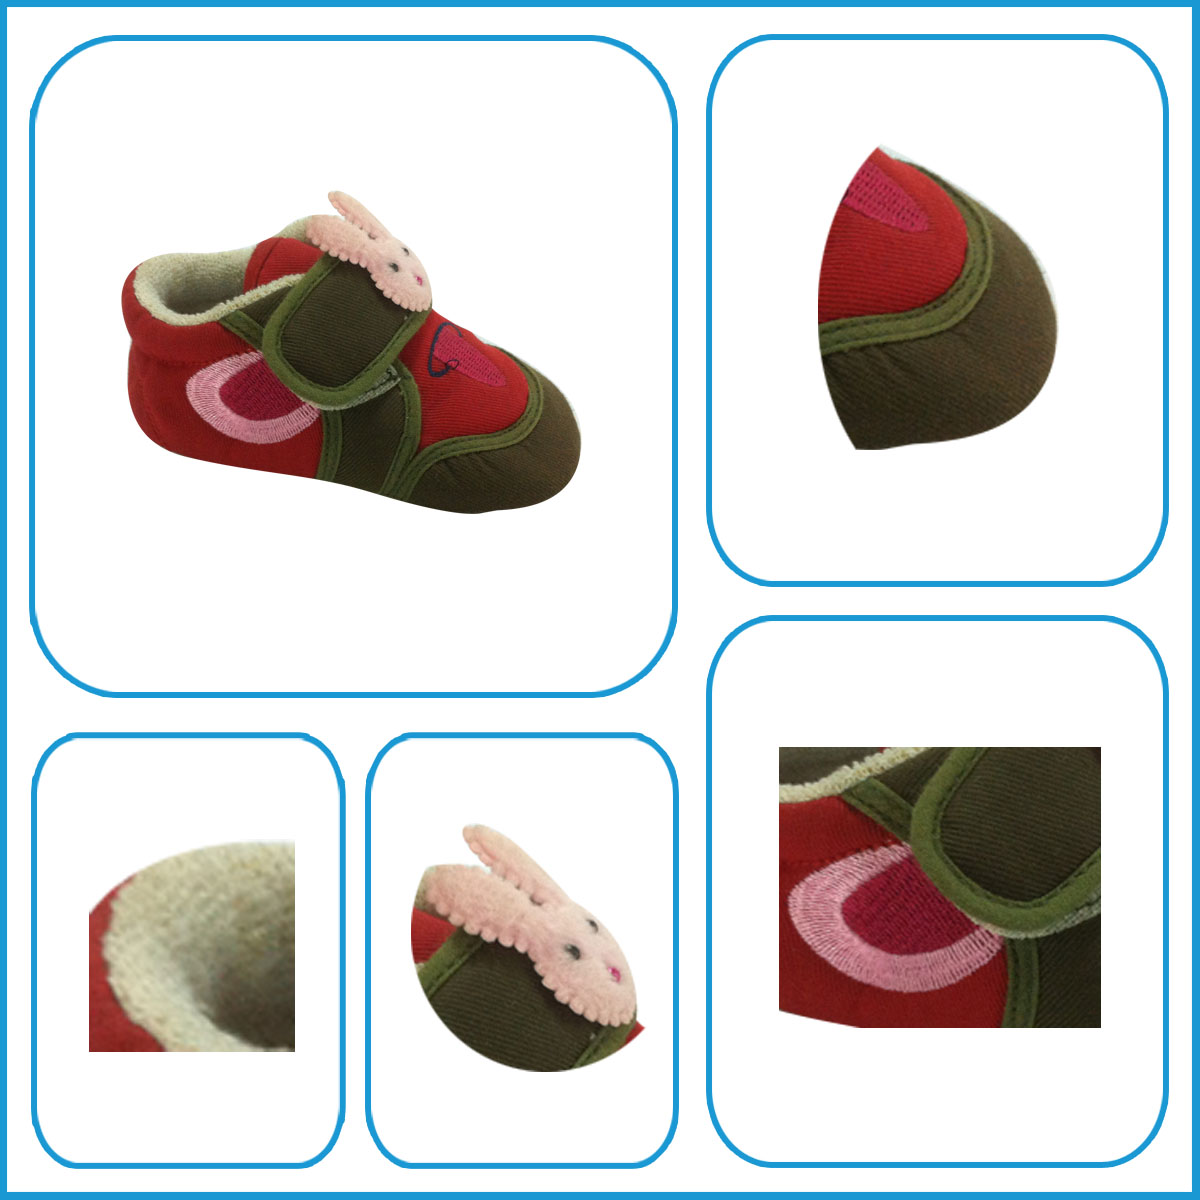 New Style Winter Red and Minitary Green Velvet Baby Ankle Shoes with Lovely Rabbit Ornament